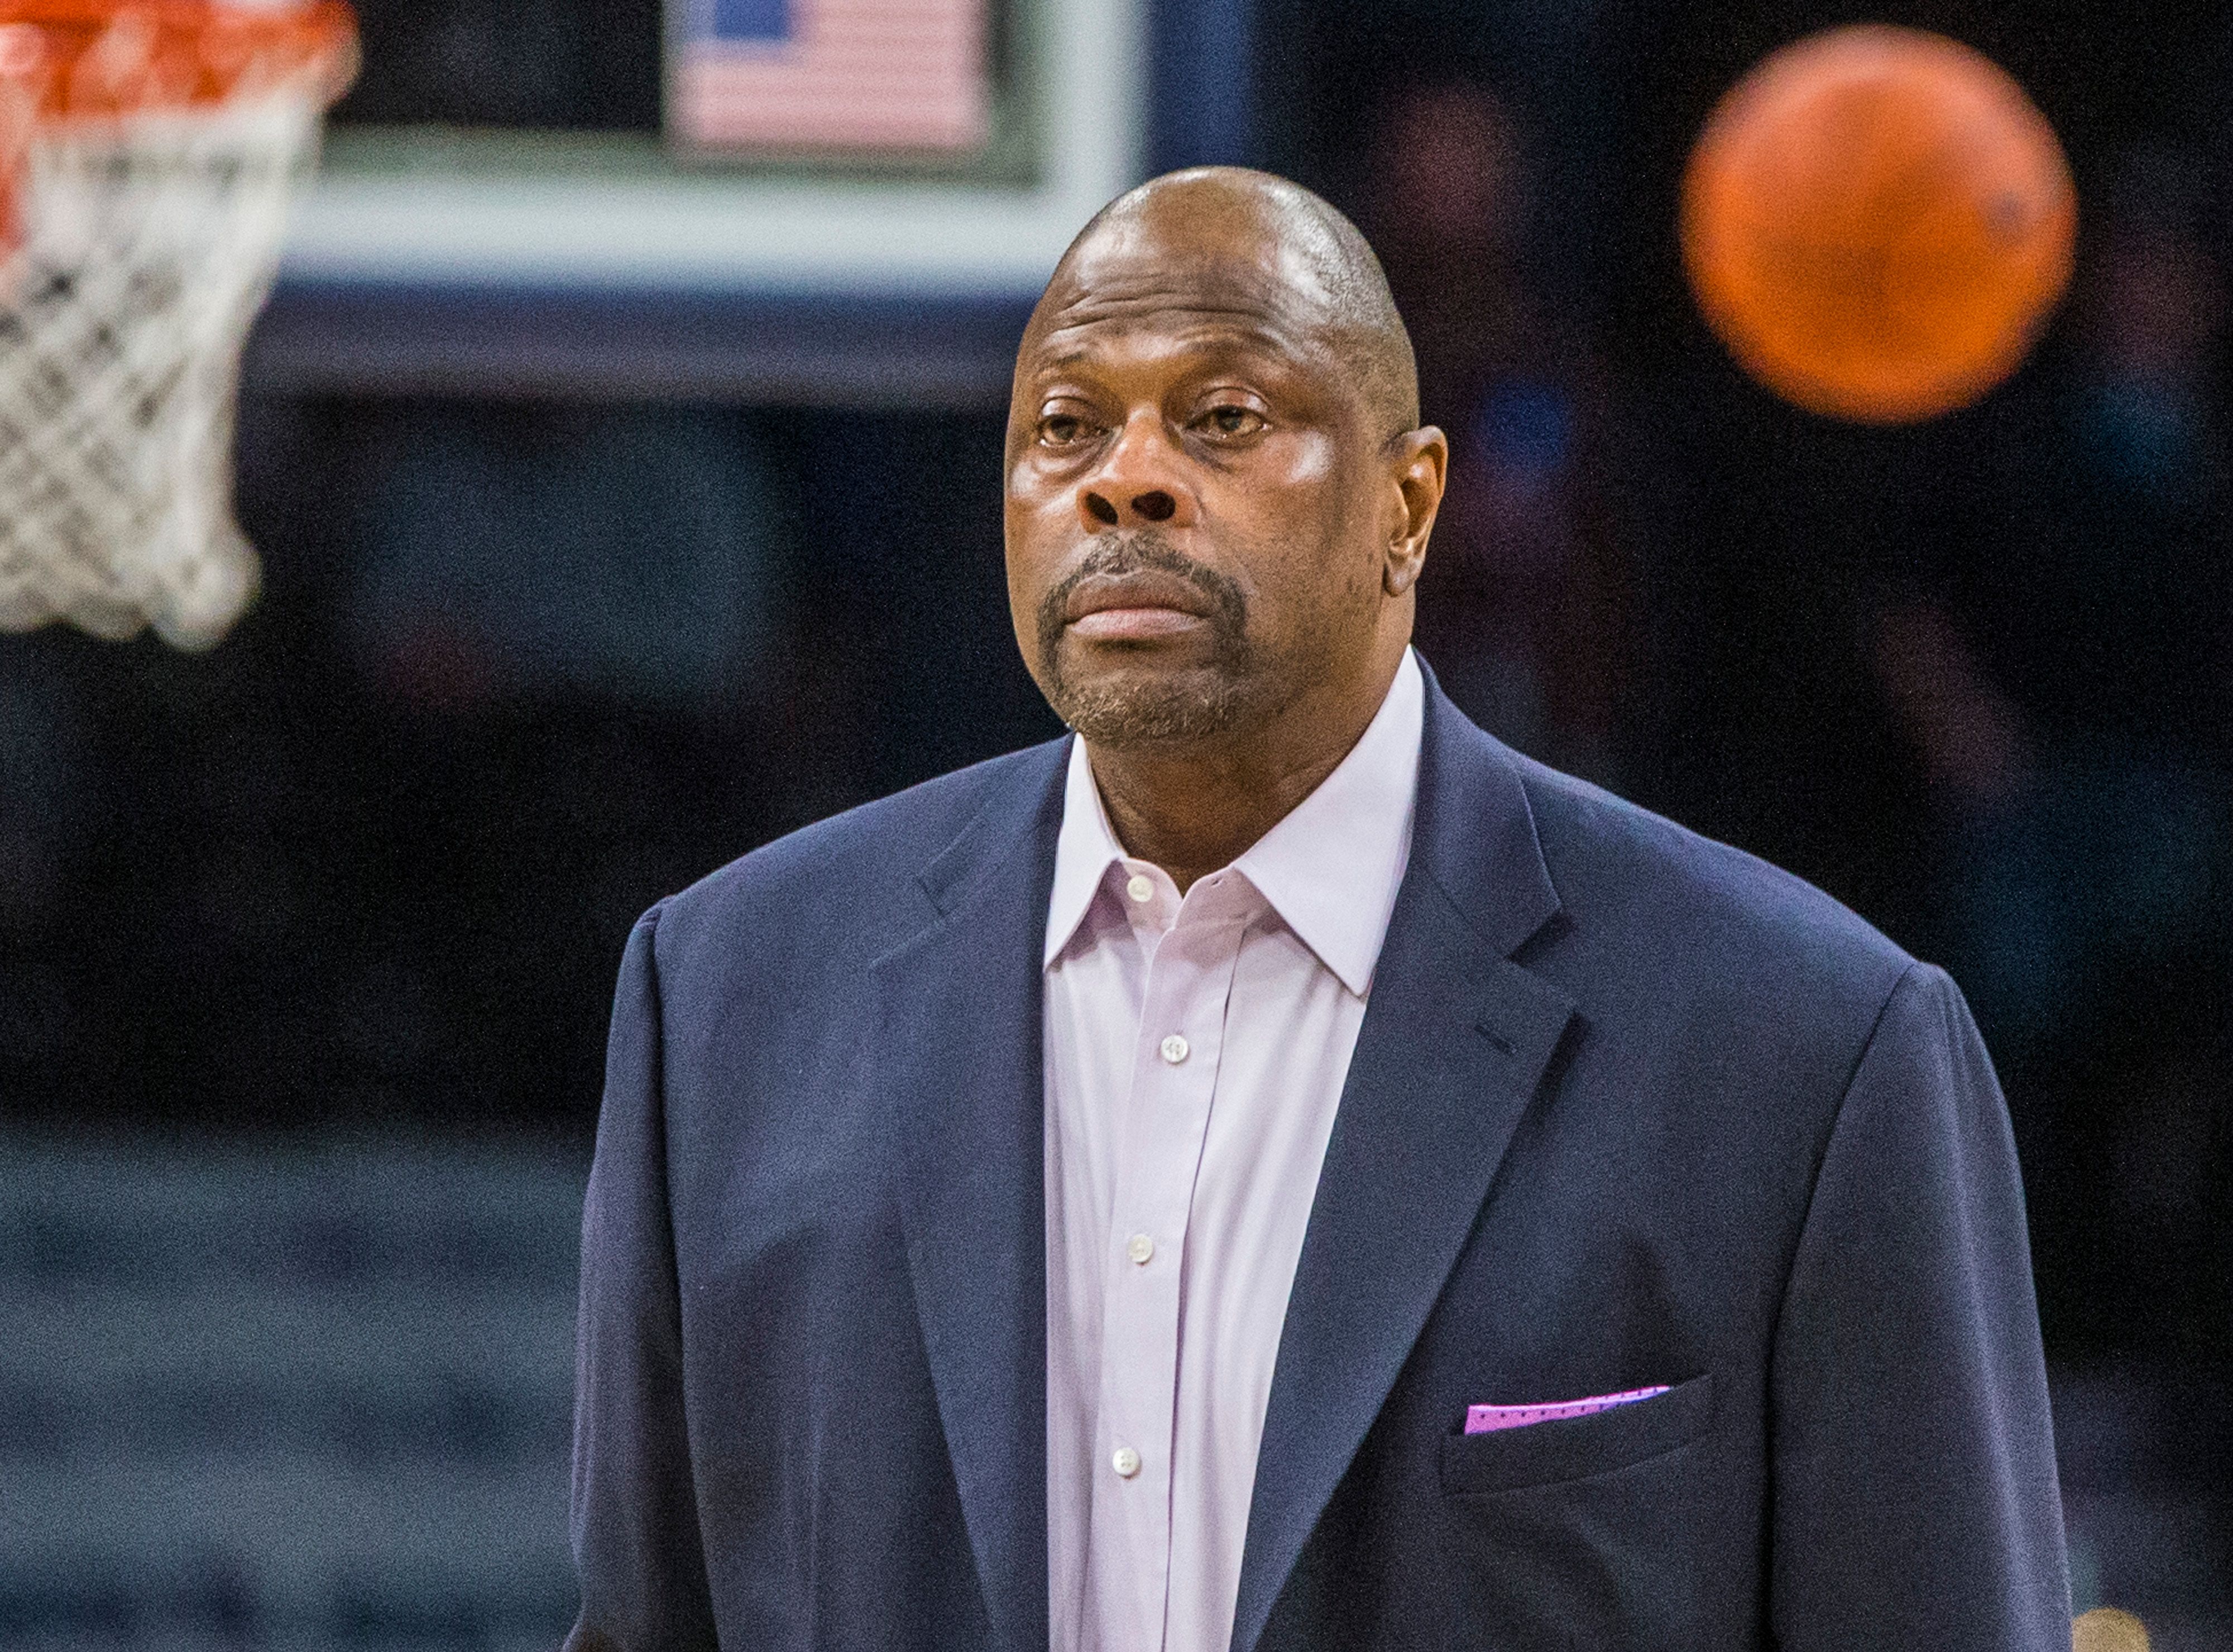 Head Coach Patrick Ewing from Georgetown University during a game between Butler and Georgetown at Capital One Arena in Washington, DC. | Photo: Tony Quinn/ISI Photos/Getty Images